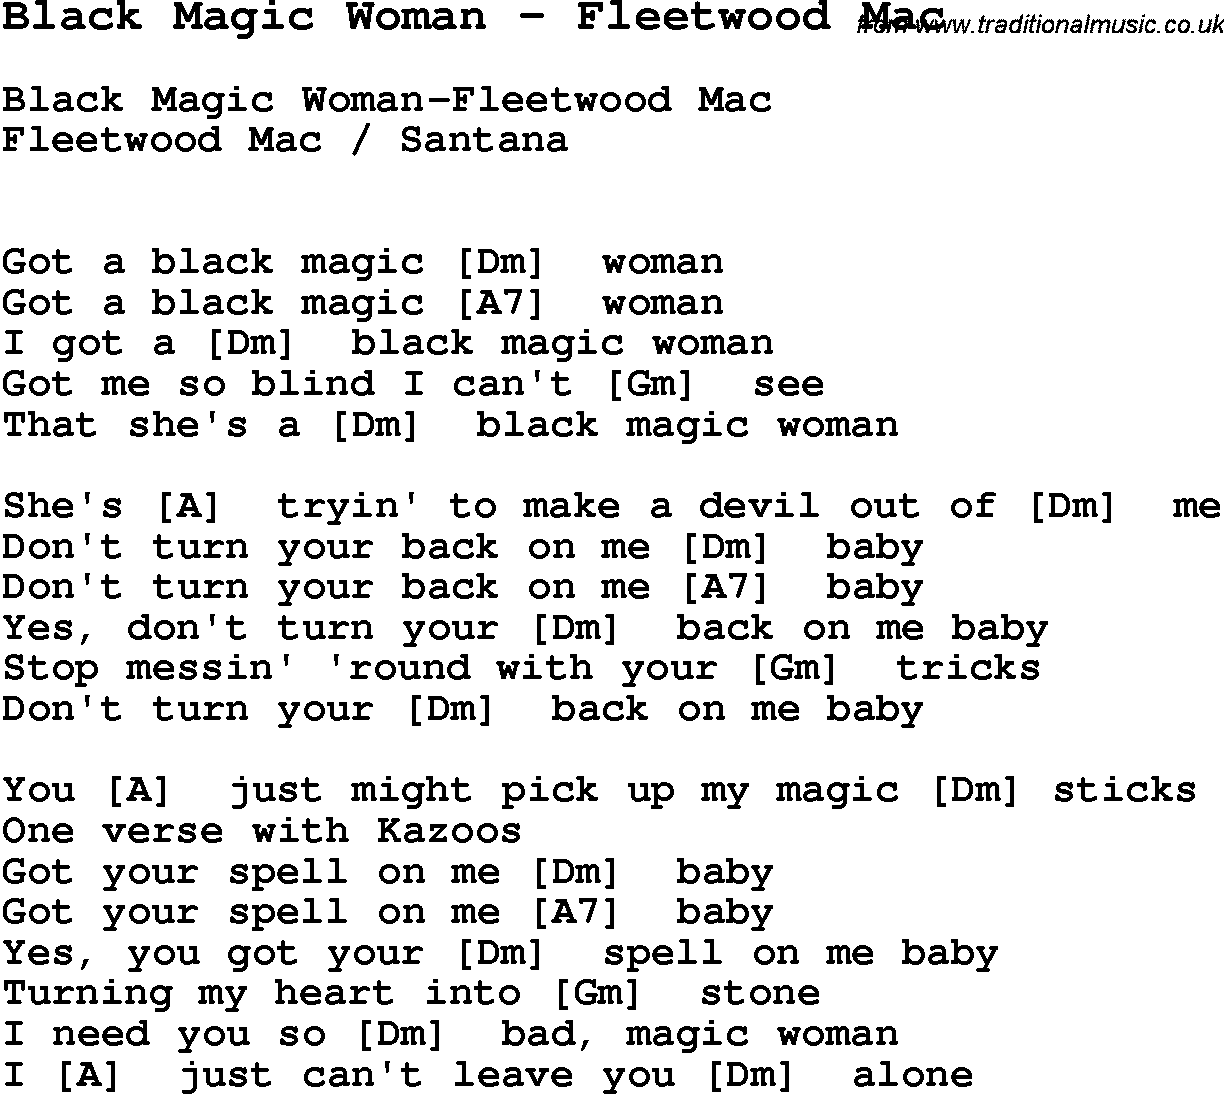 Song Black Magic Woman by Fleetwood Mac, with lyrics for vocal performance and accompaniment chords for Ukulele, Guitar Banjo etc.